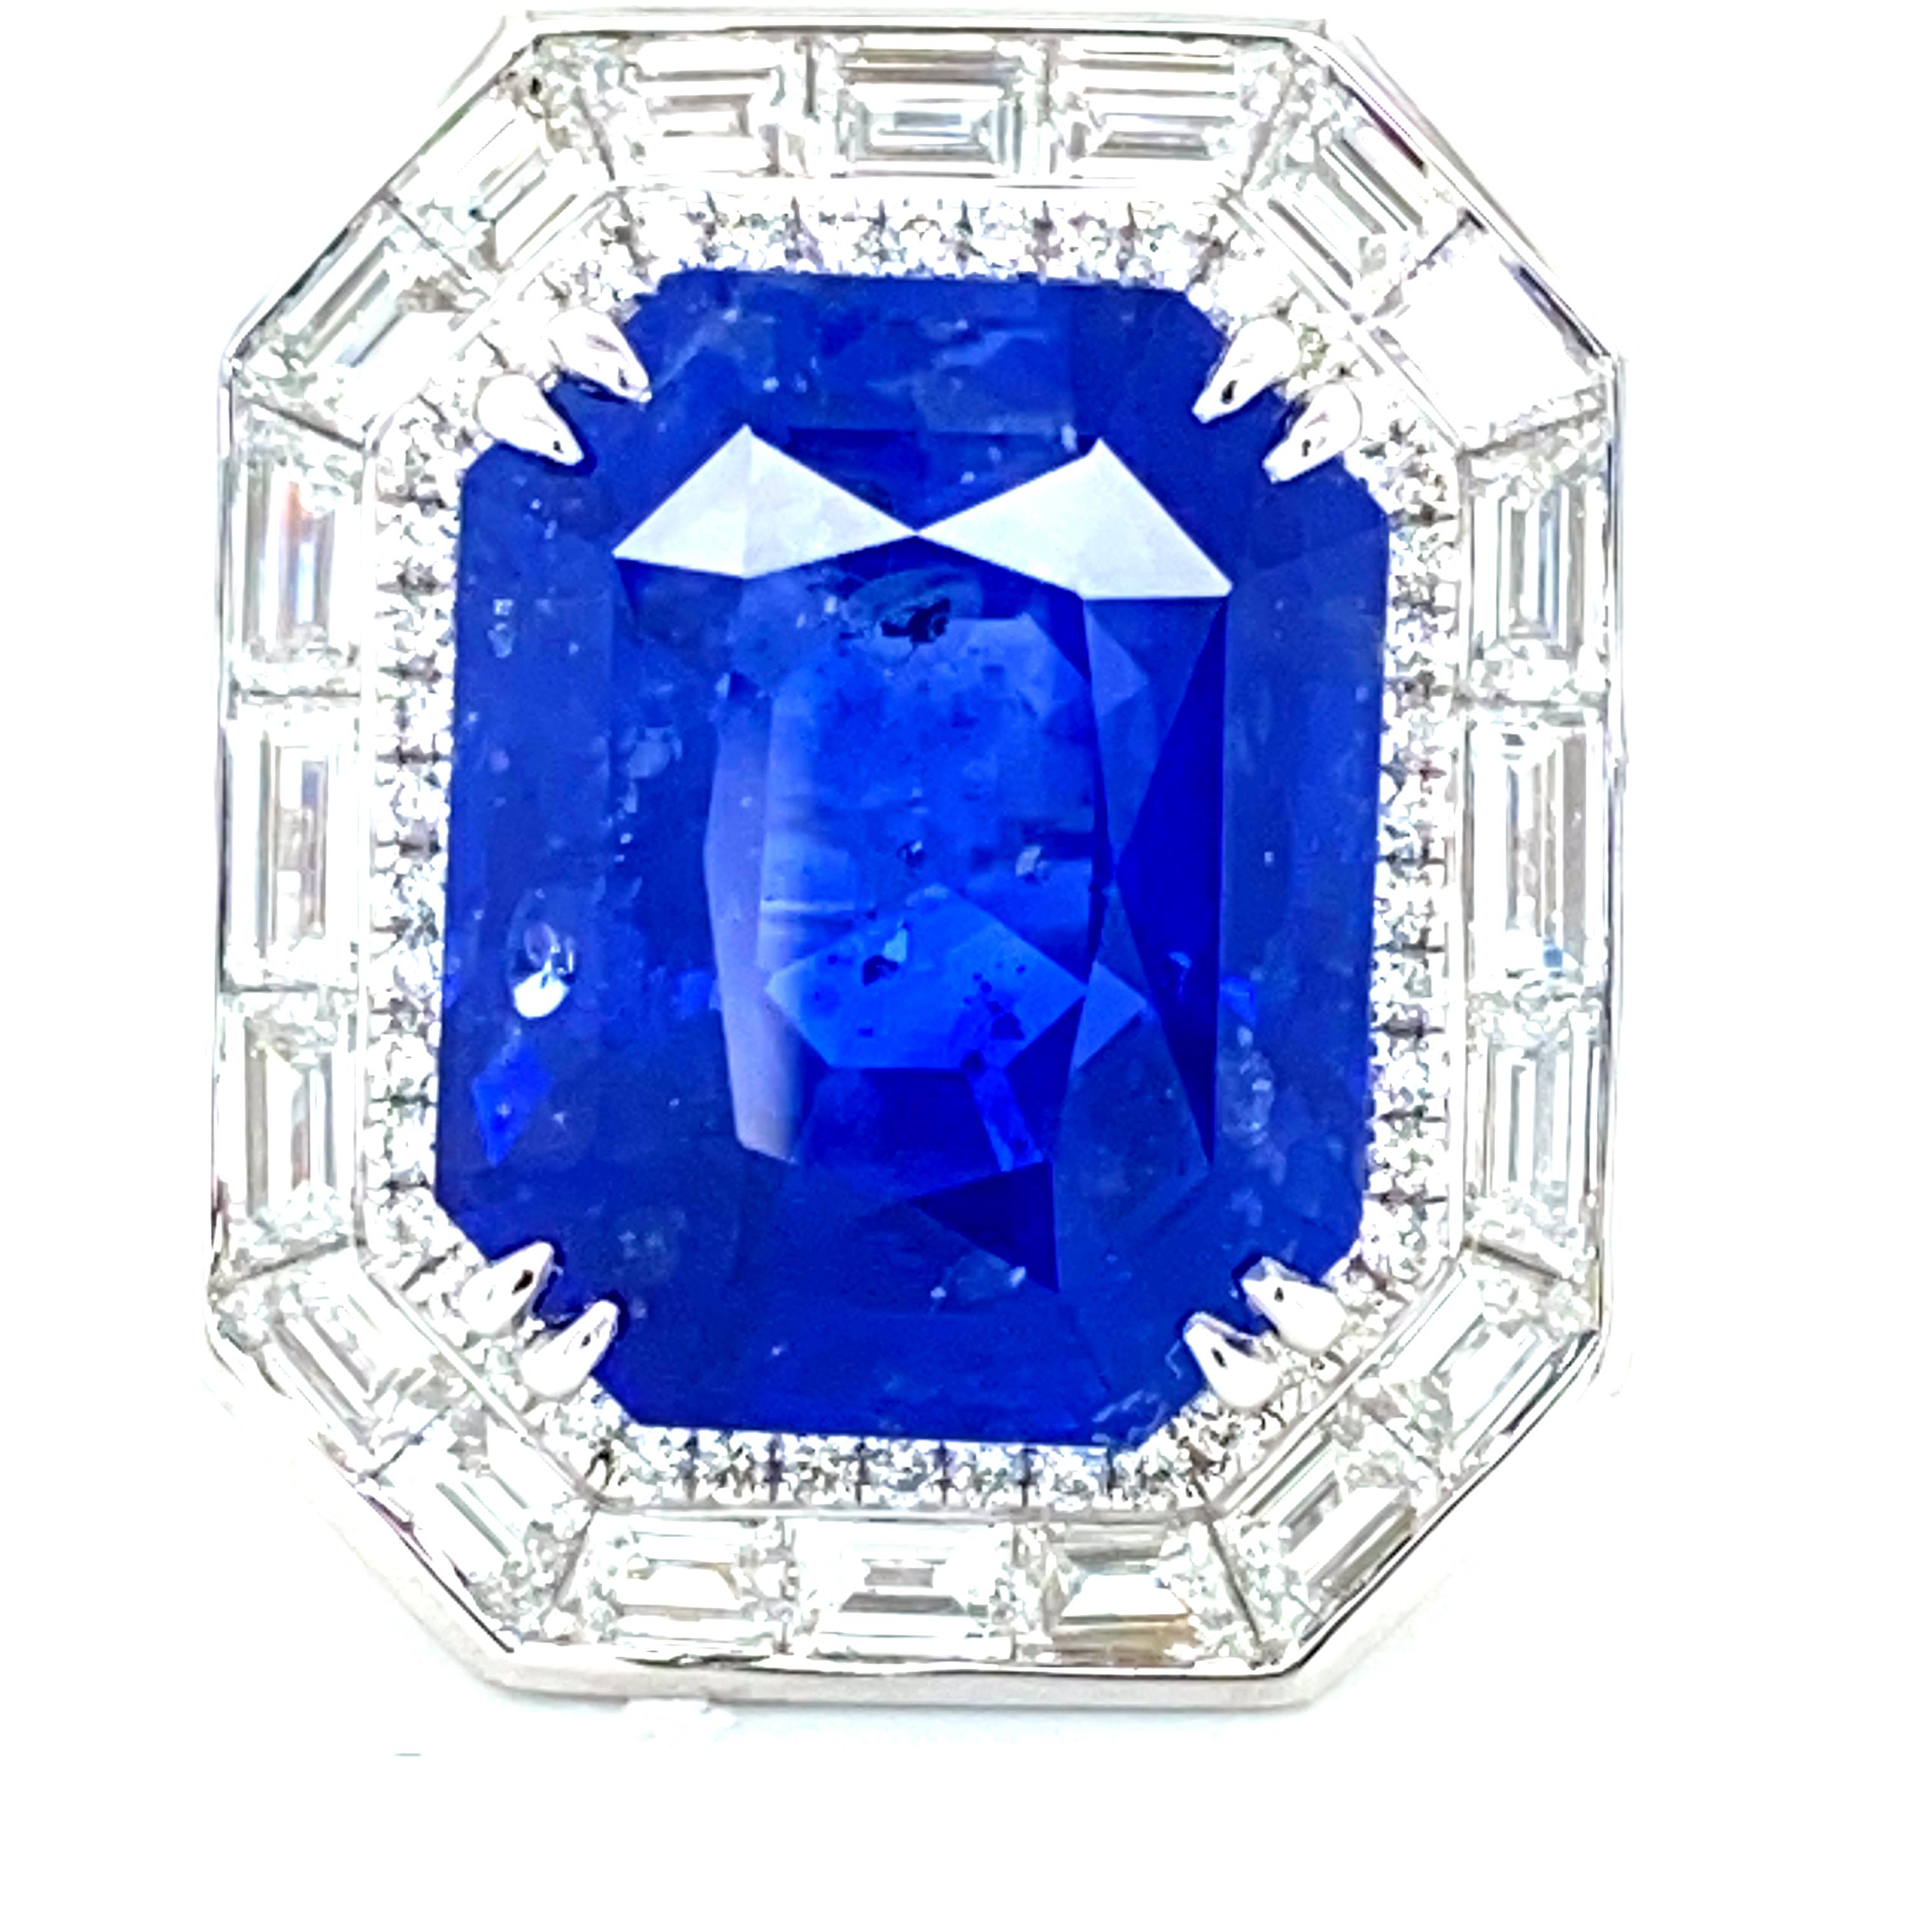 22.43 Carat GRS Certified Cornflower Blue Sapphire And White Diamond Gold Ring:

A rare find! Beautifully crafted and designed, this ring boasts a large and rare sapphire weighing 22.43 carat and certified by GRS Lab. It has also been given the